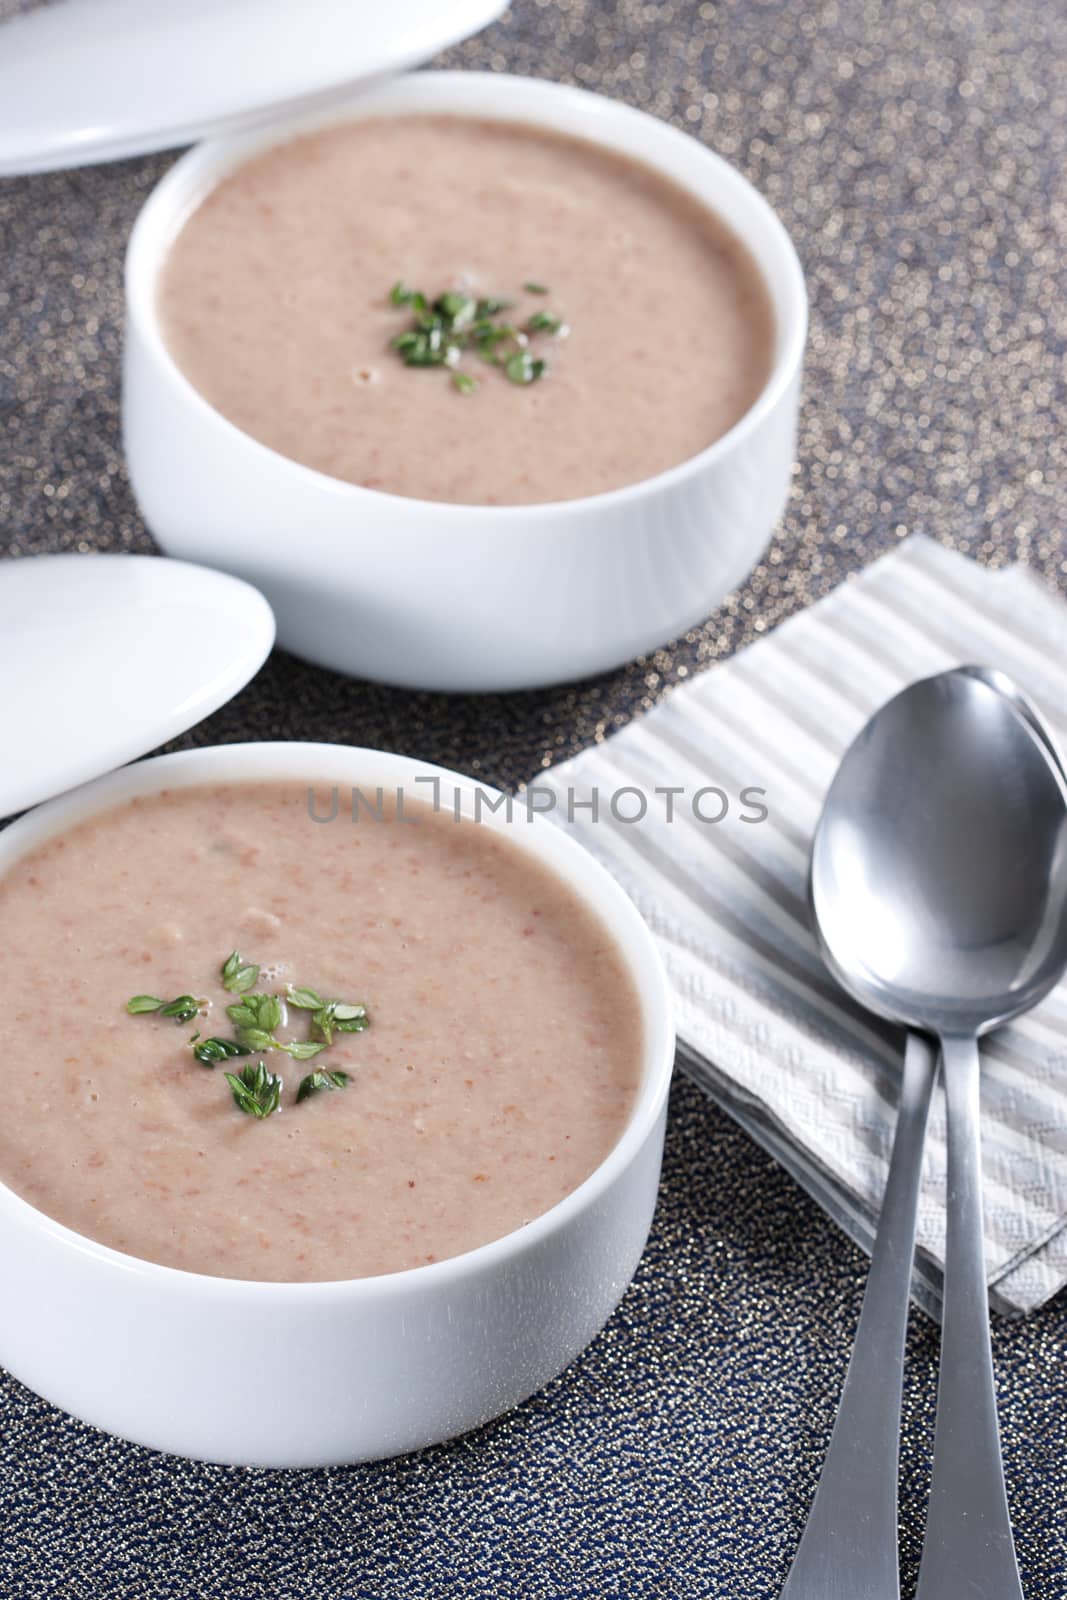 Cream soup with mushrooms and bean